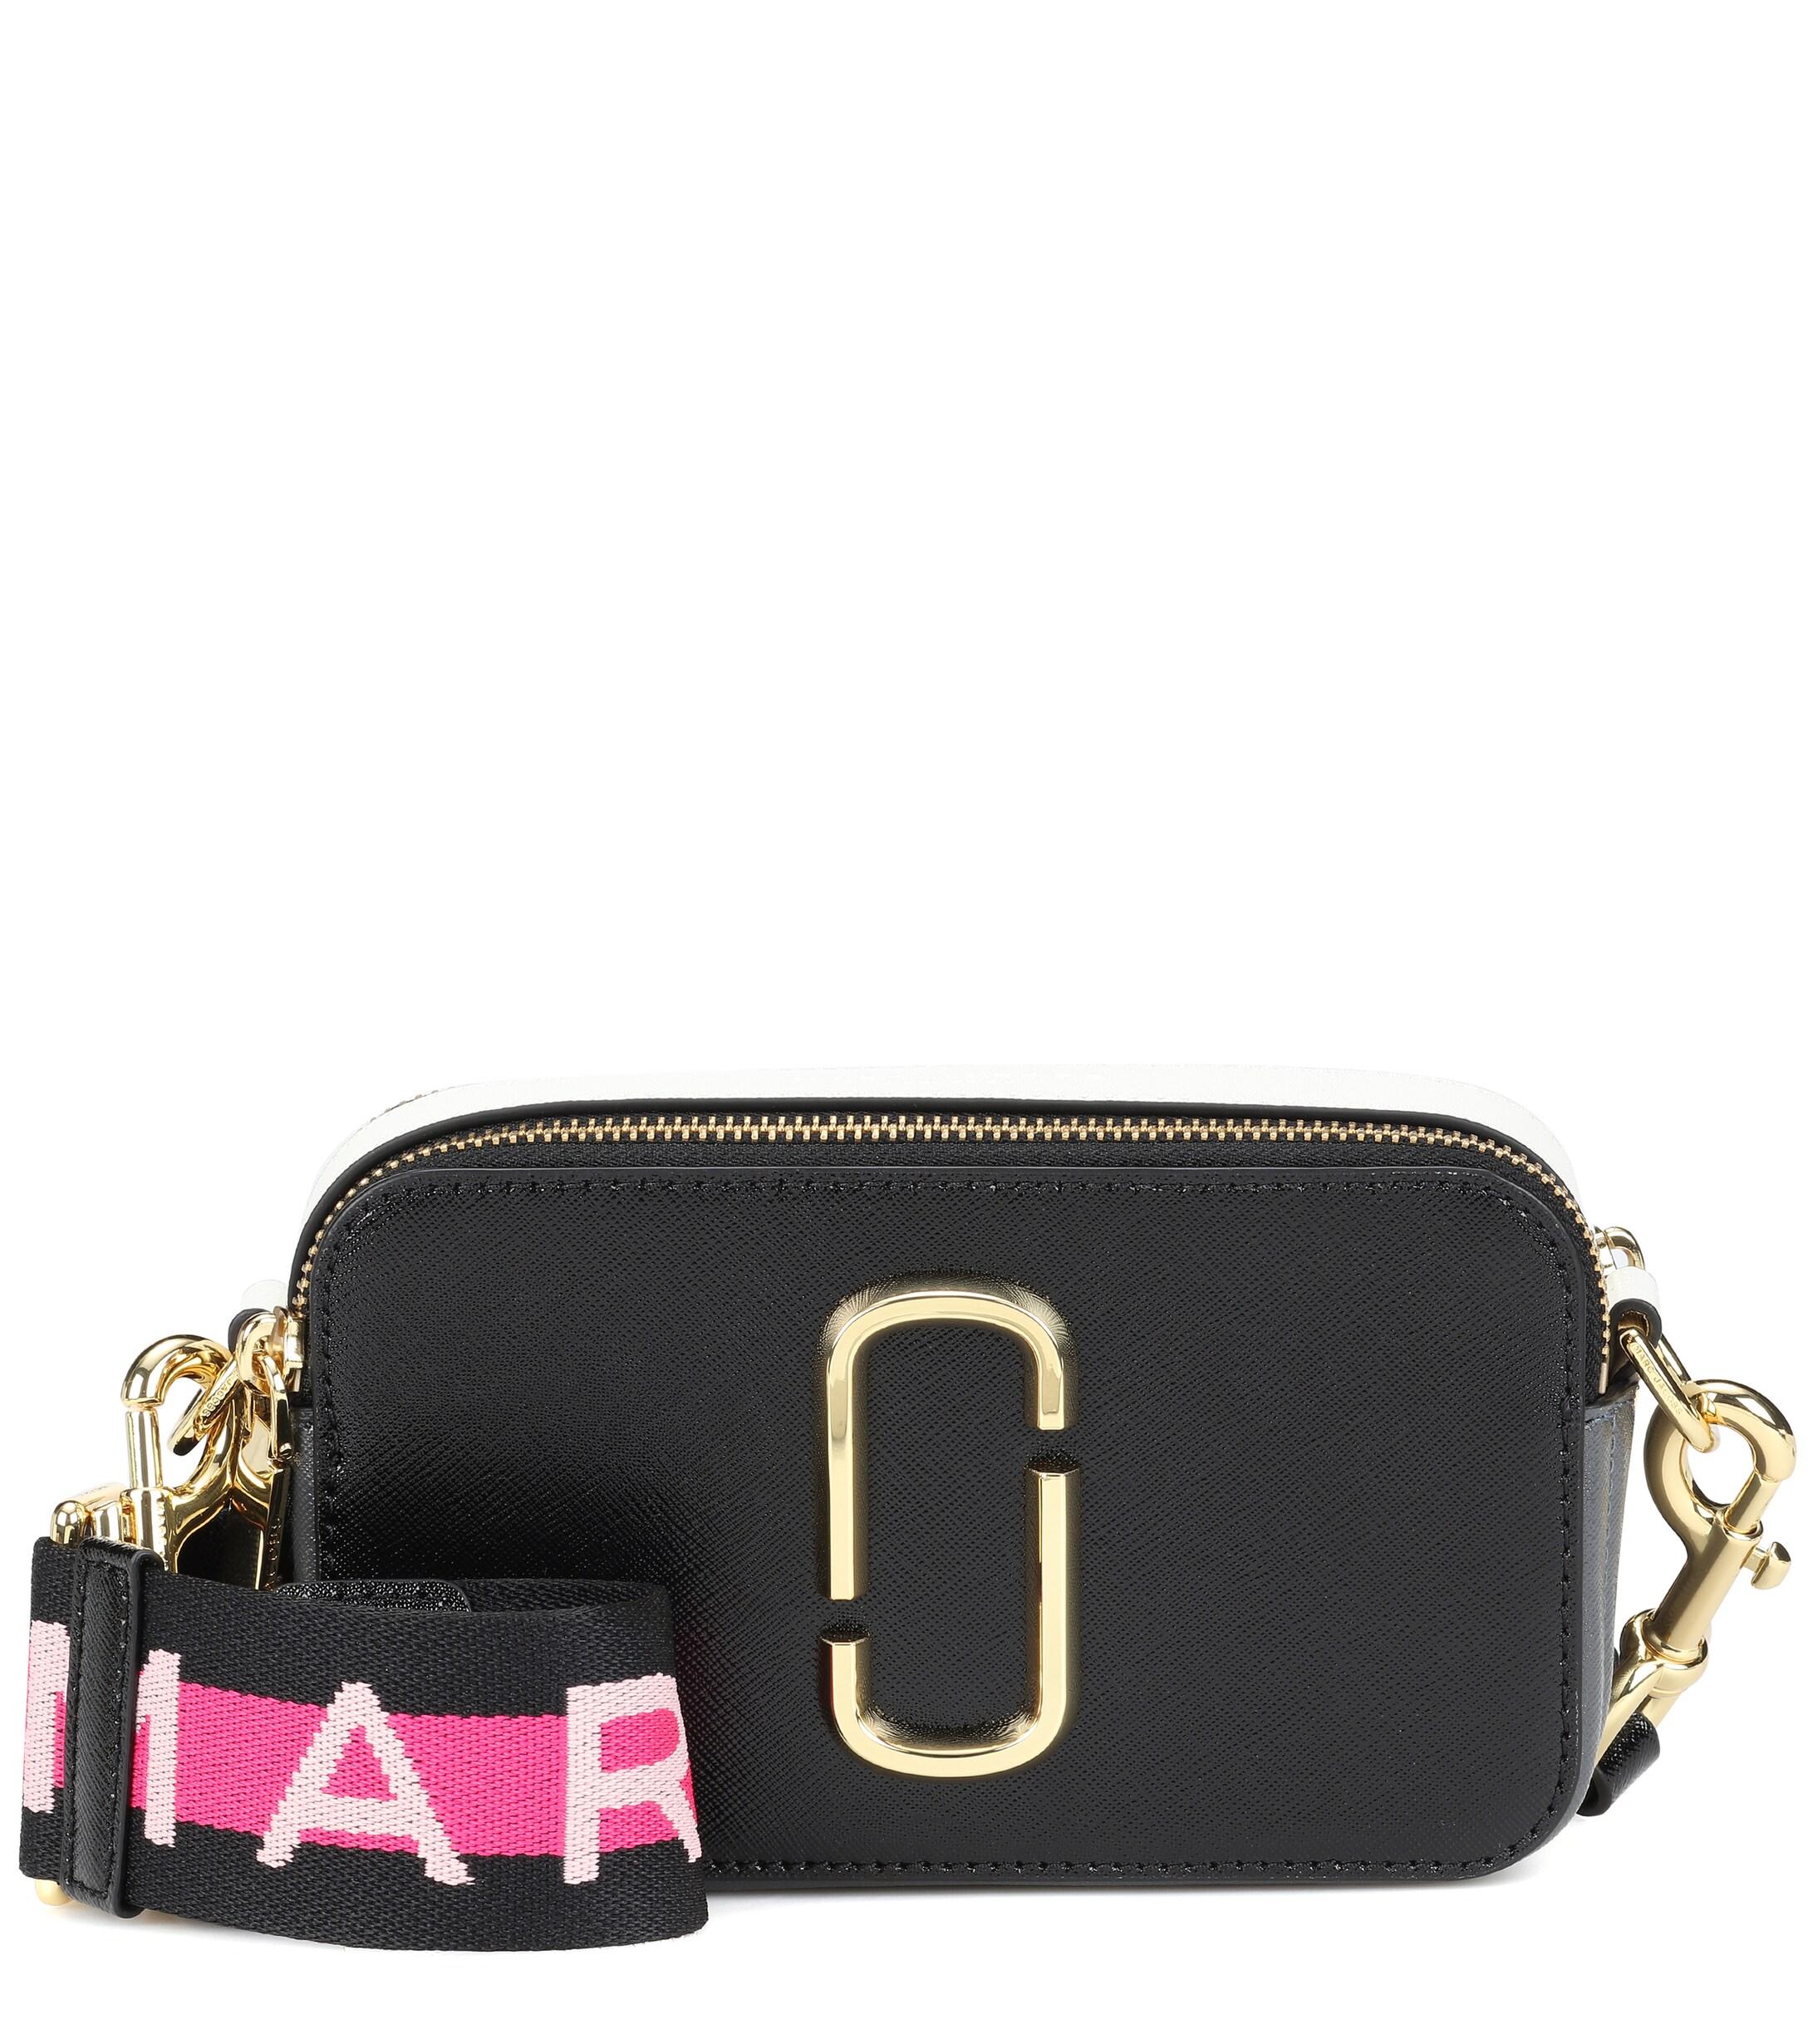 Marc Jacobs Snapshot Small Leather Crossbody Bag in Black - Lyst